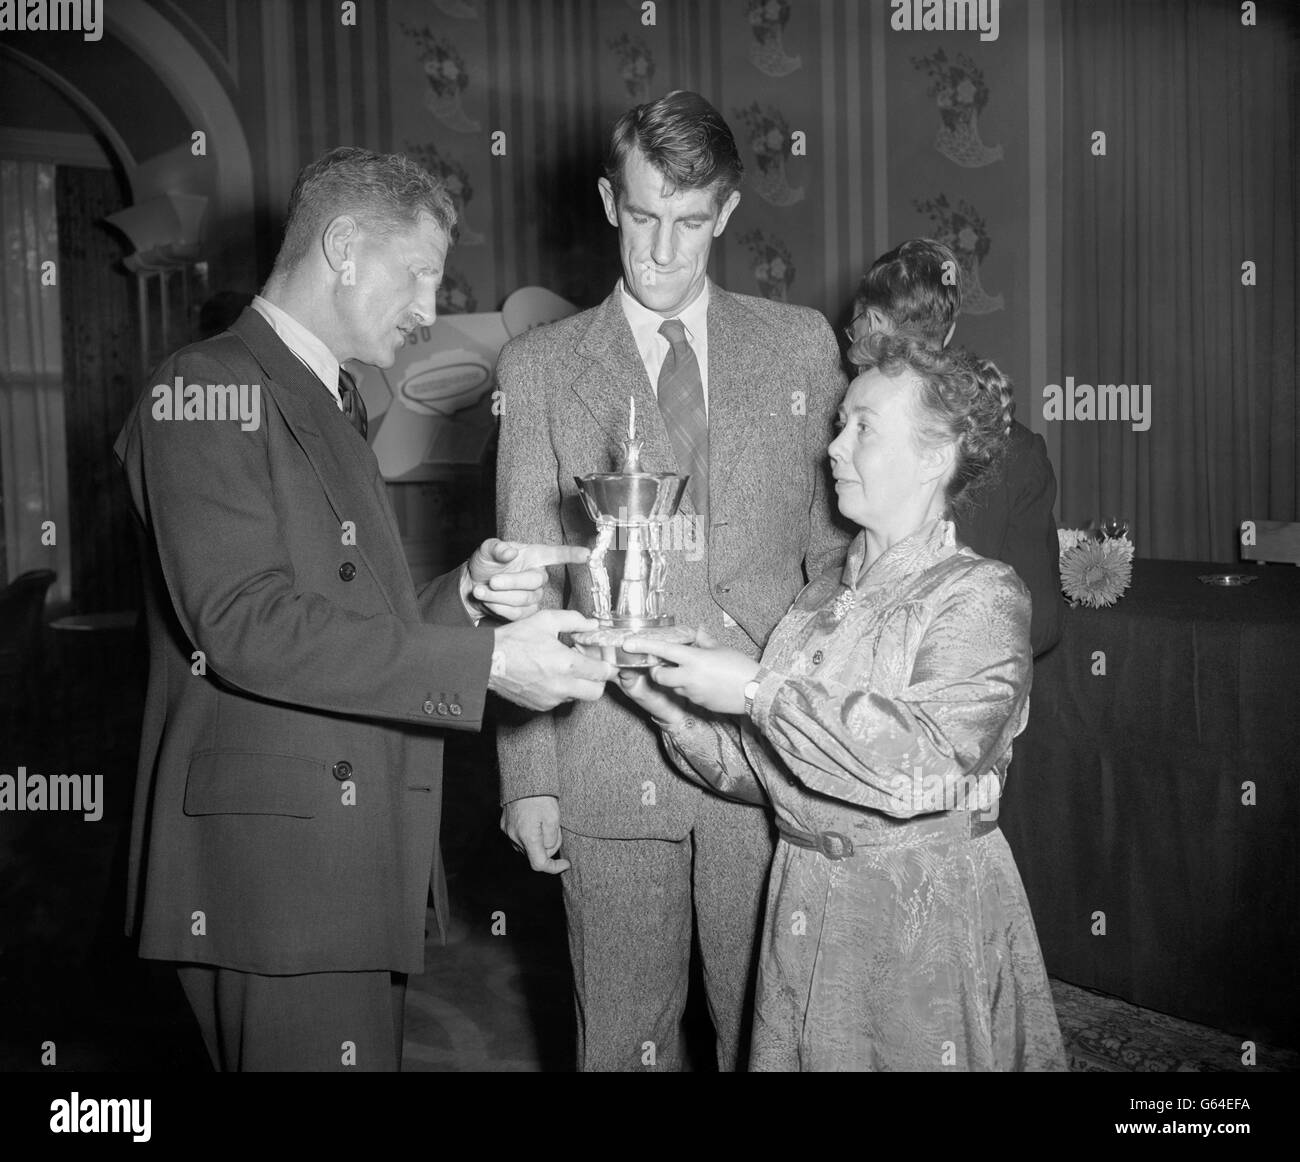 Colonel Sir John Hunt (l), leader of the successful British expedition to Mount Everest, receives the Silver Pears Trophy from Miss Mary Barker in recognition of his achievement . The presentation was held at the Savoy Hotel, London, by Miss Barker, Editor of Pears Encyclopaedia, which will make an annual award to Britain's most distinguished personality of the year. In the centre of the picture is Sir Edmund Hillary. Stock Photo